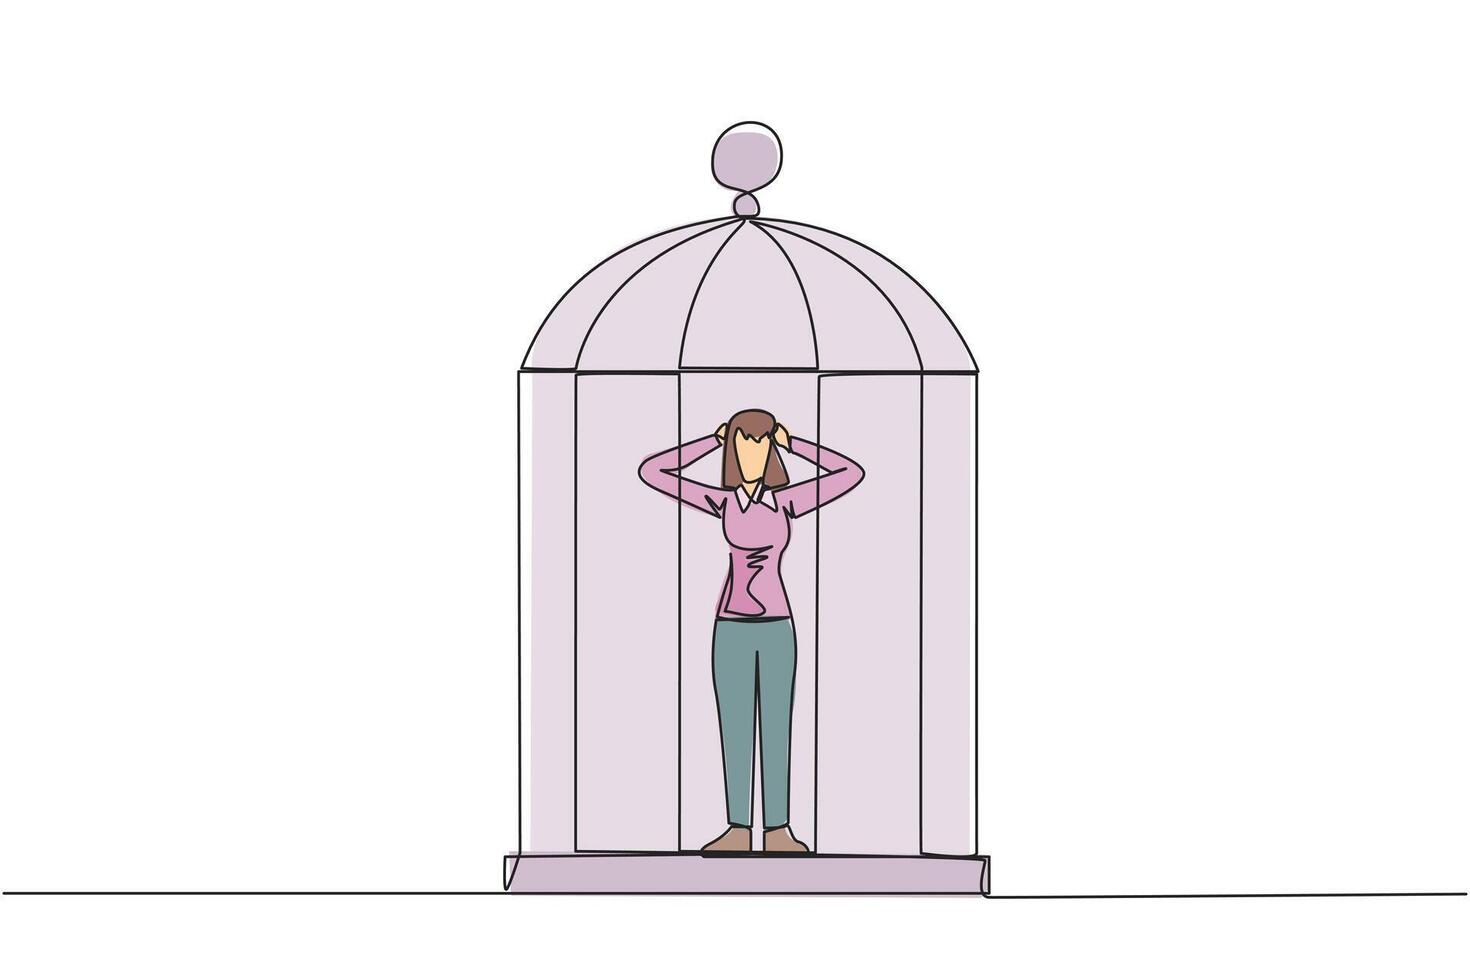 Continuous one line drawing tired businesswoman trapped in cage standing frustrated holding head. Anxiety caused can not move freely. Confined. Imprisoned. Single line draw design illustration vector